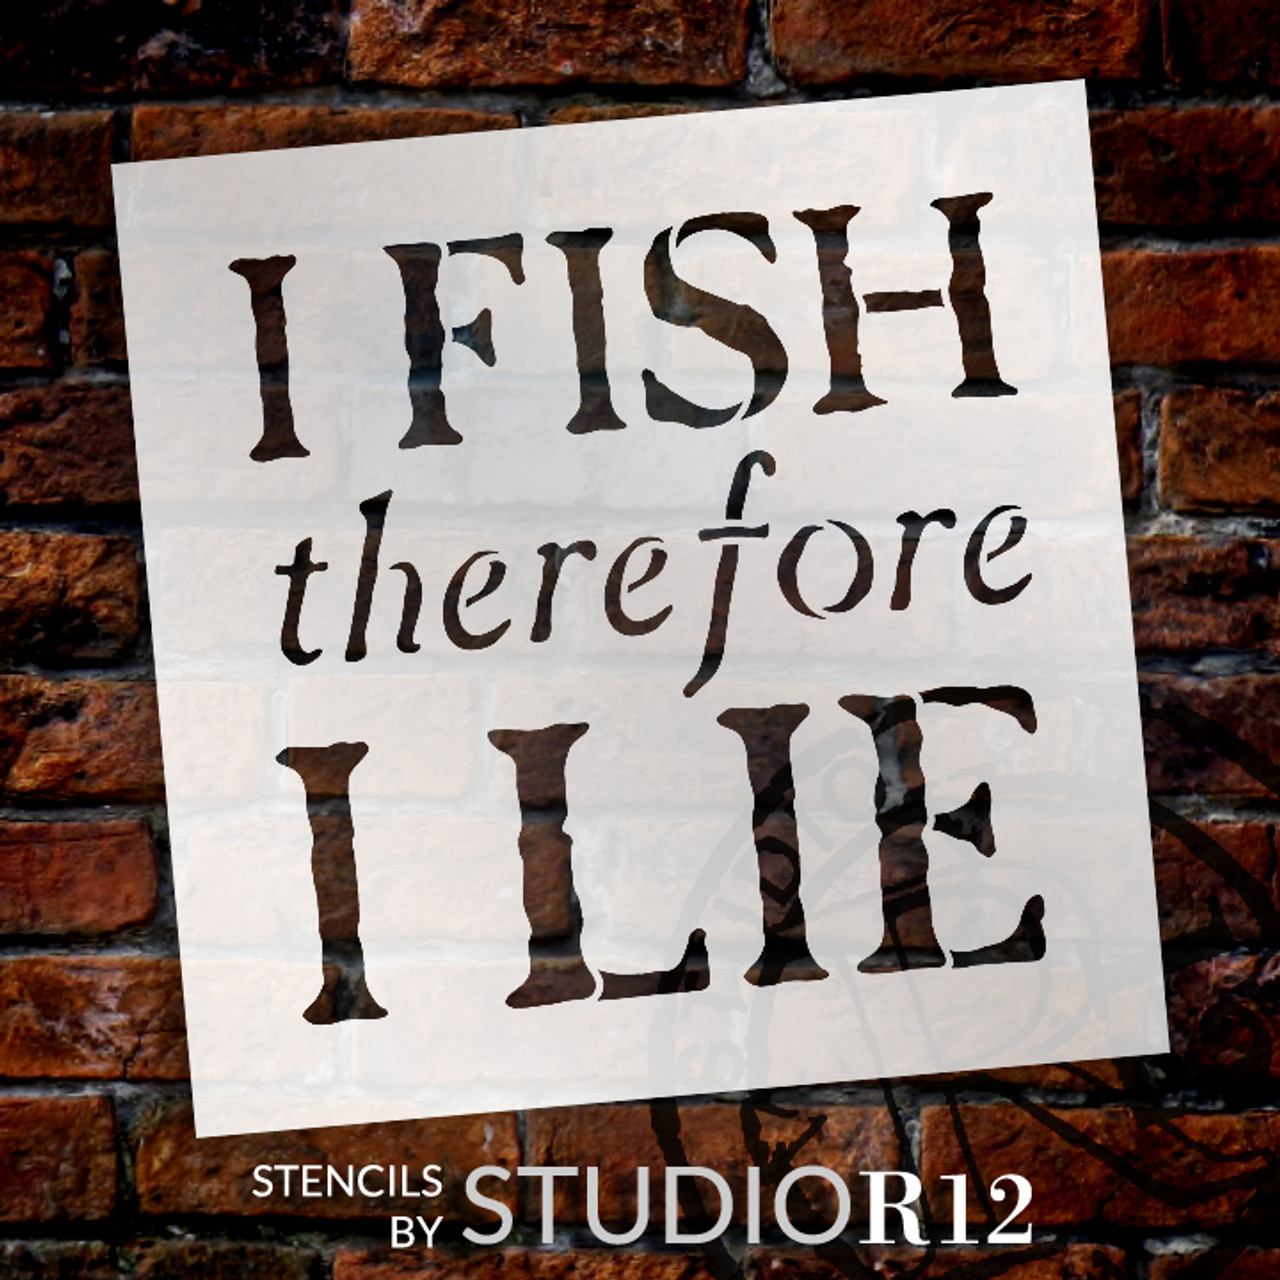 I Fish Therefore I Lie - Word Stencil -9" x 9" - STCL1322_2 by StudioR12